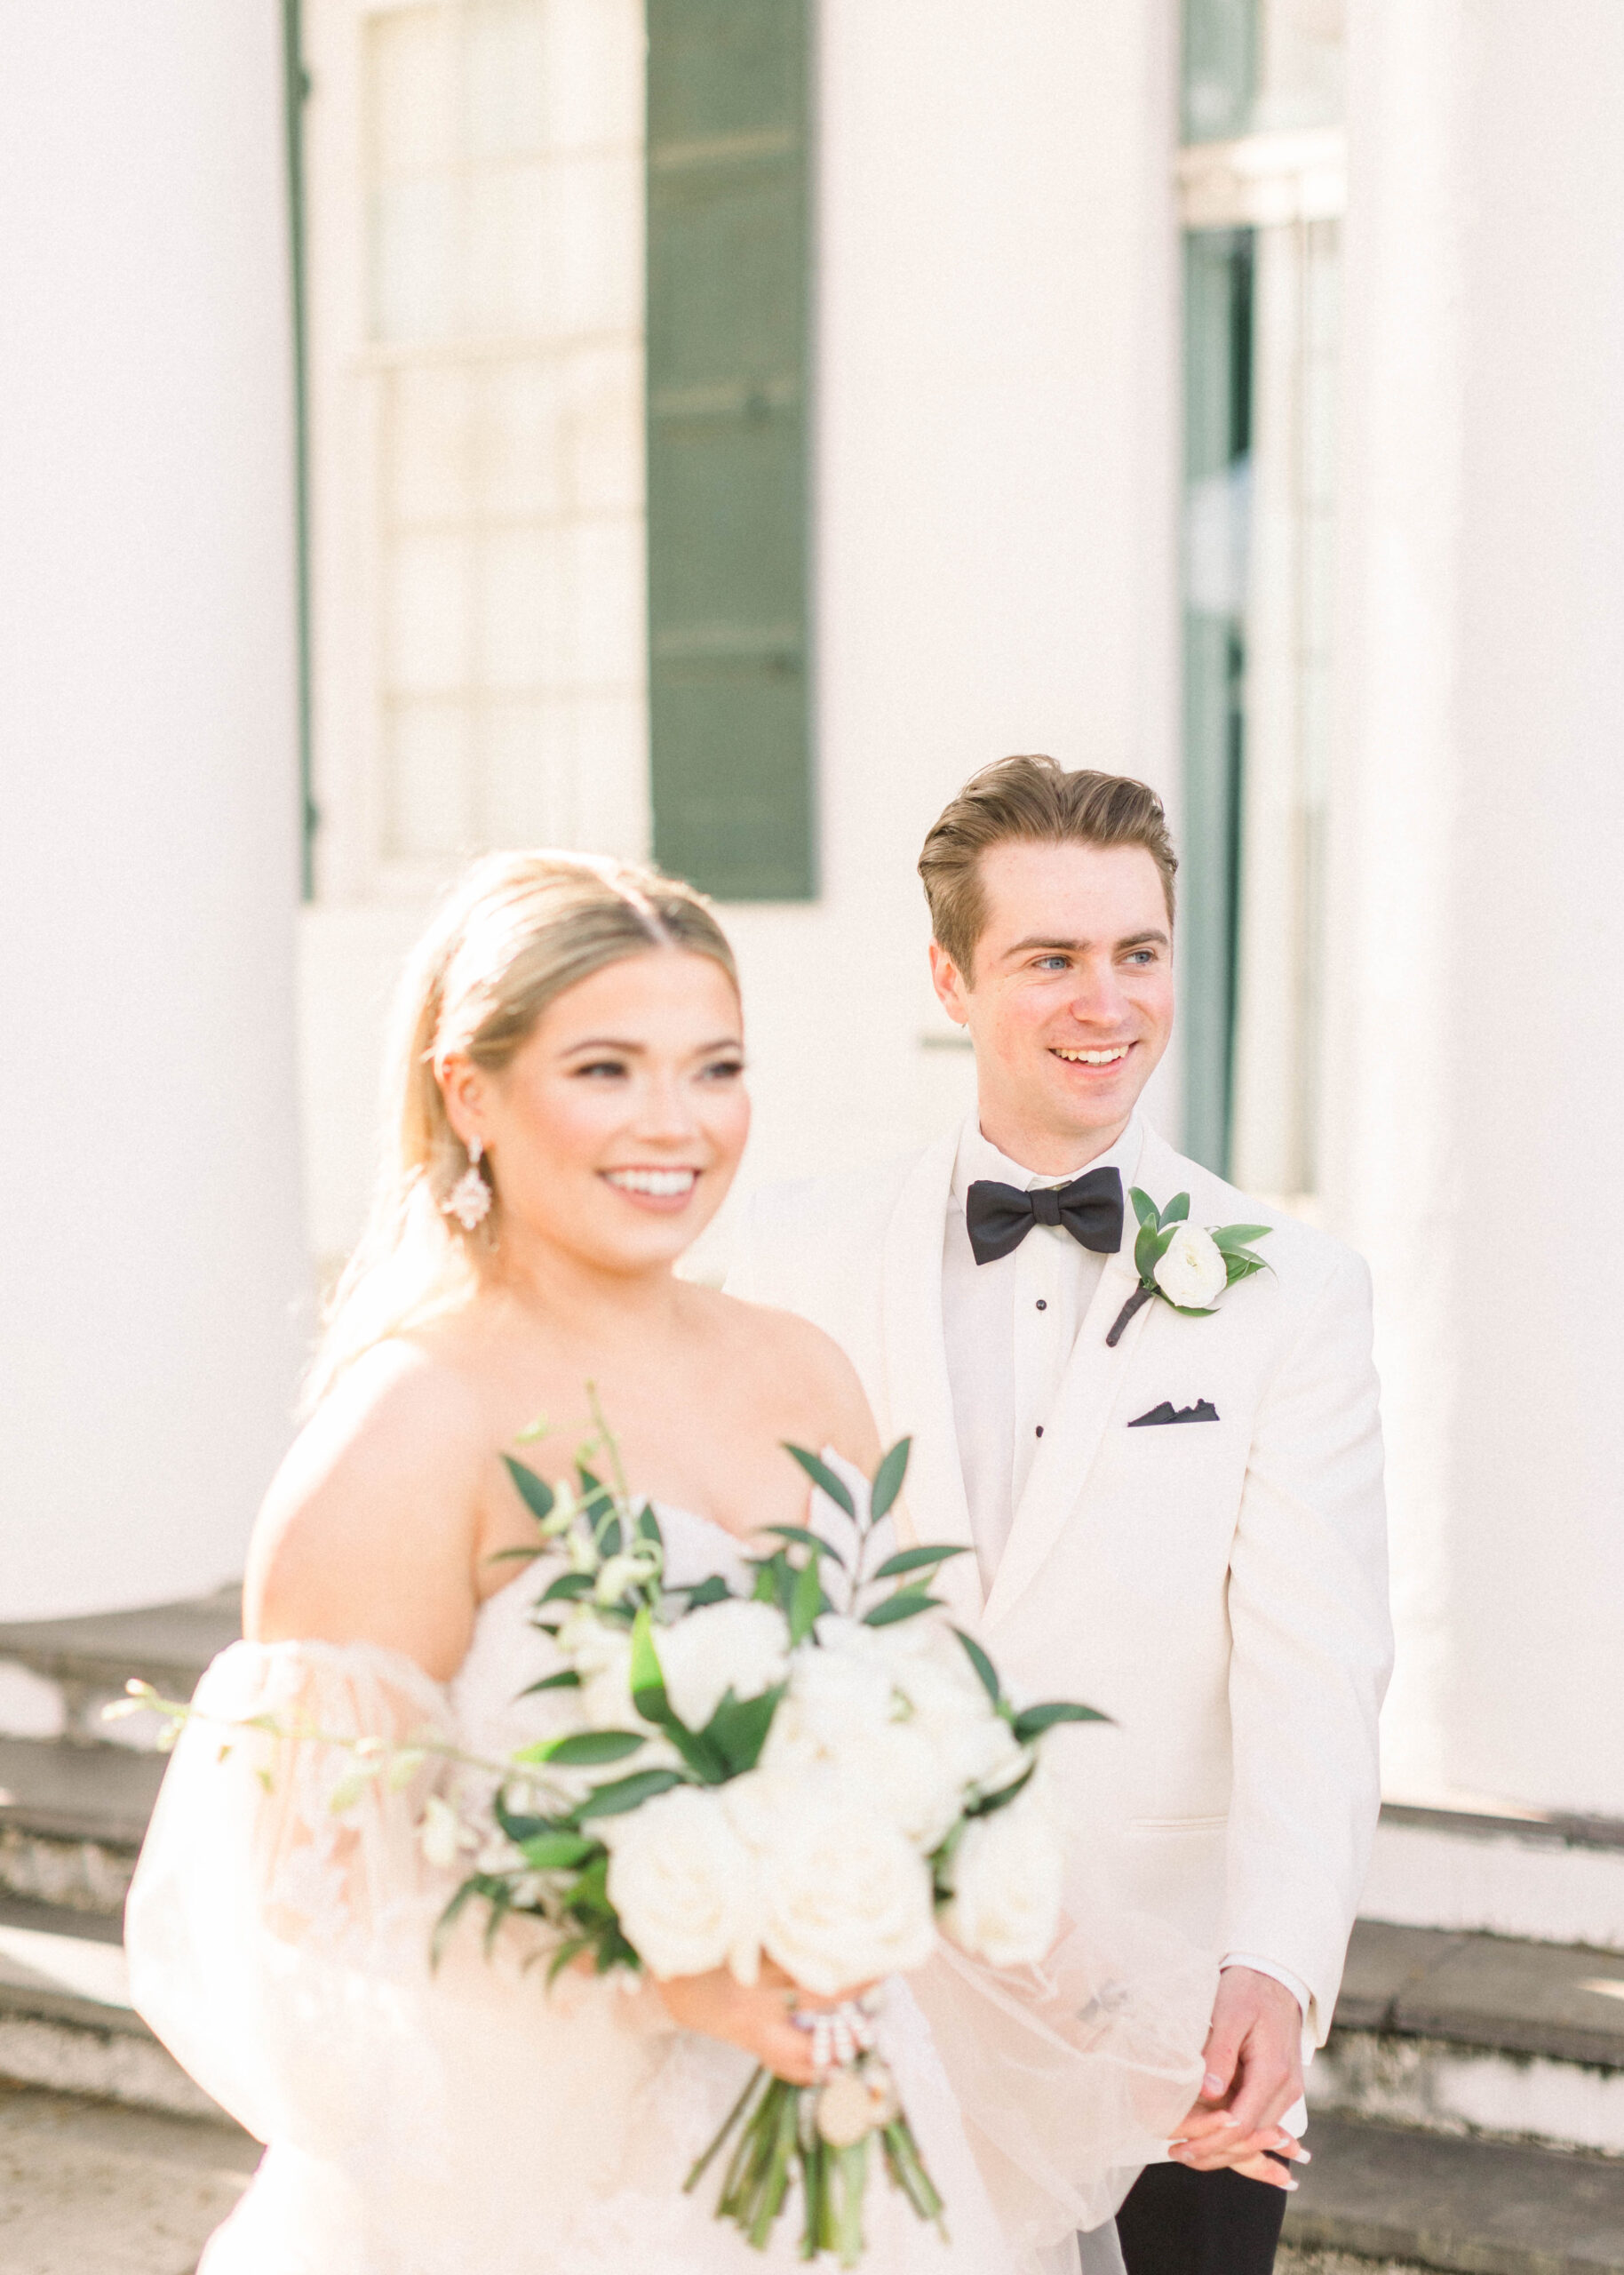 bride and groom in white in candid wedding day photo at their southern wedding day